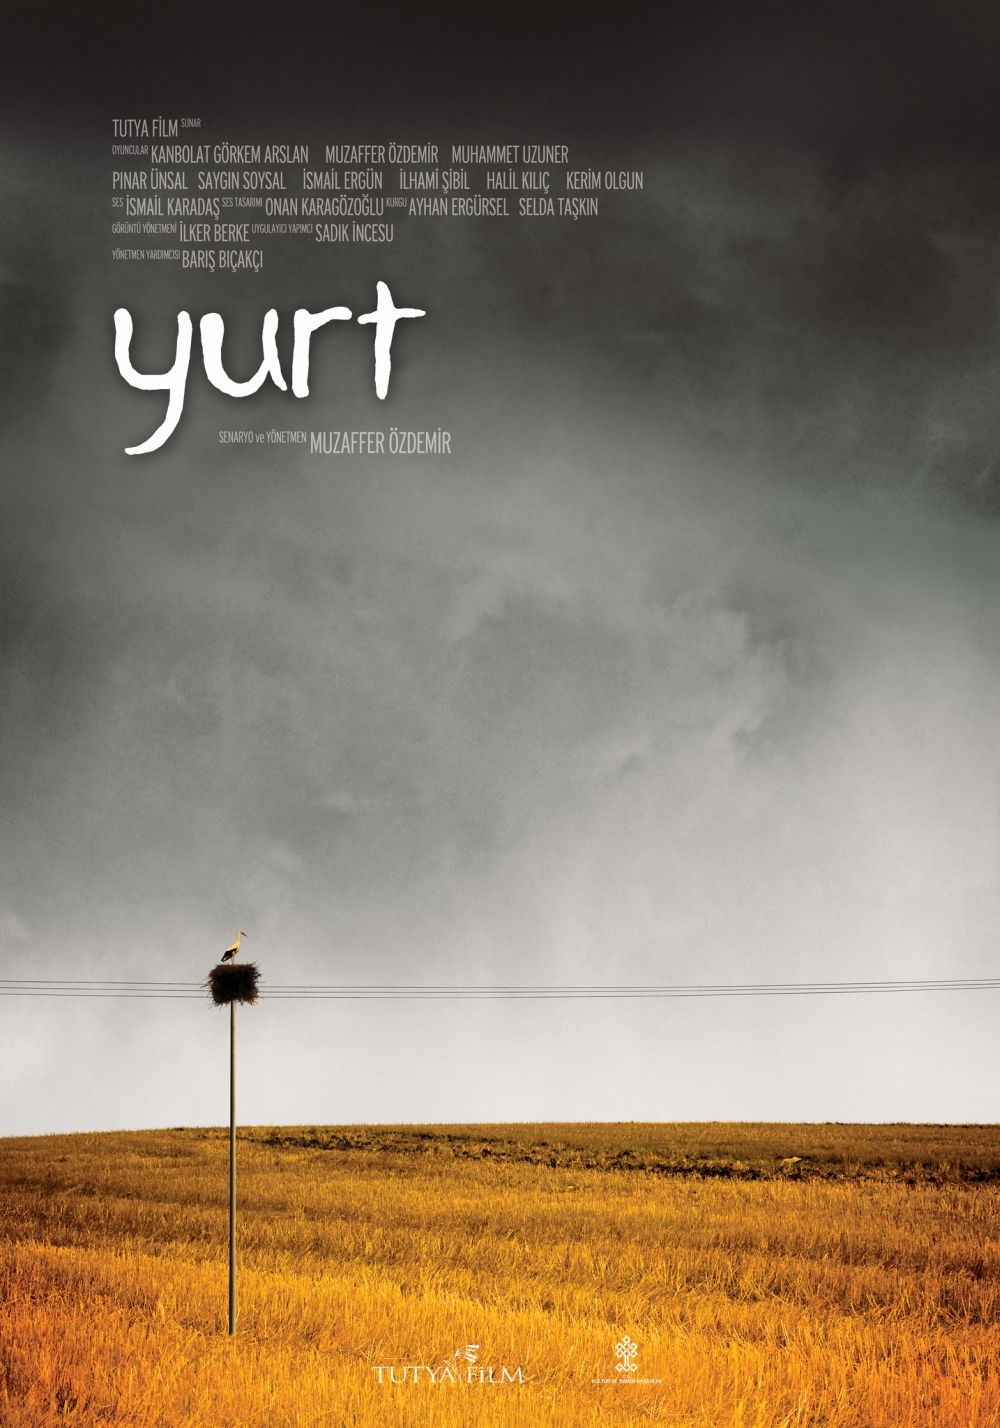 Extra Large Movie Poster Image for Yurt 